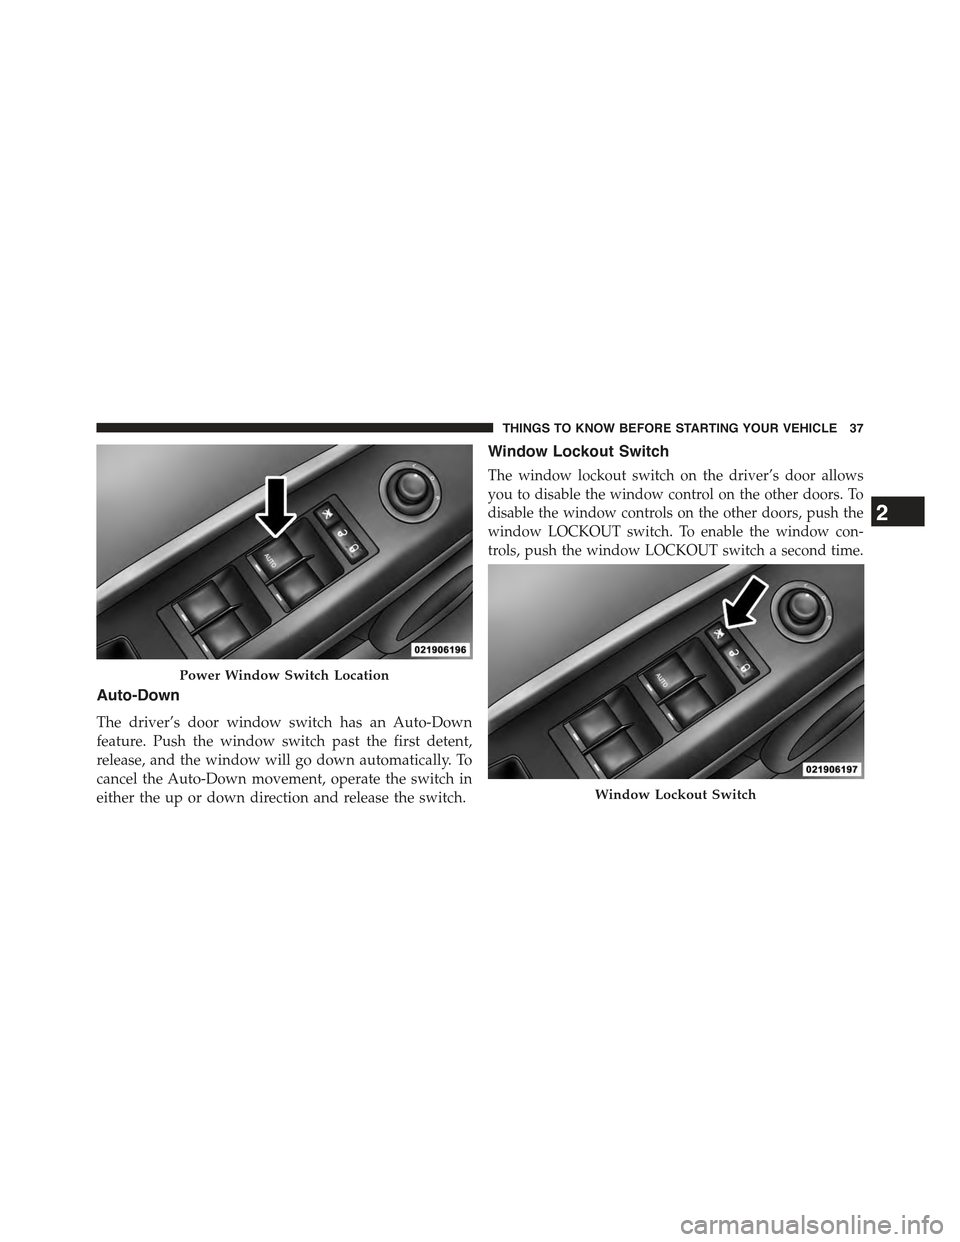 JEEP COMPASS 2015 1.G Owners Guide Auto-Down
The driver’s door window switch has an Auto-Down
feature. Push the window switch past the first detent,
release, and the window will go down automatically. To
cancel the Auto-Down movement